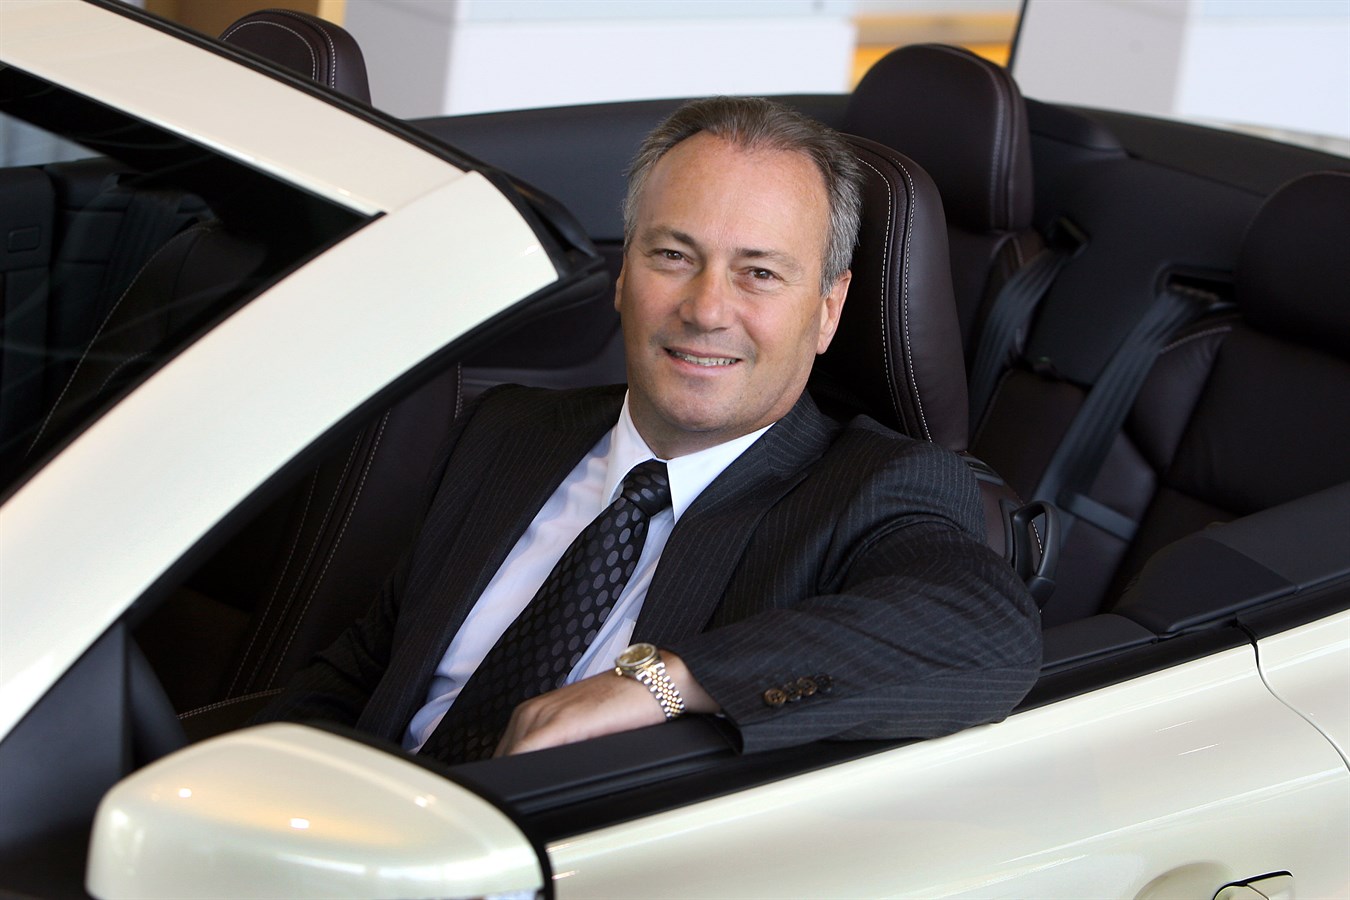 Stephen Odell, President and CEO of Volvo Car Corporation from 1 October 2008 to 2 August 2010